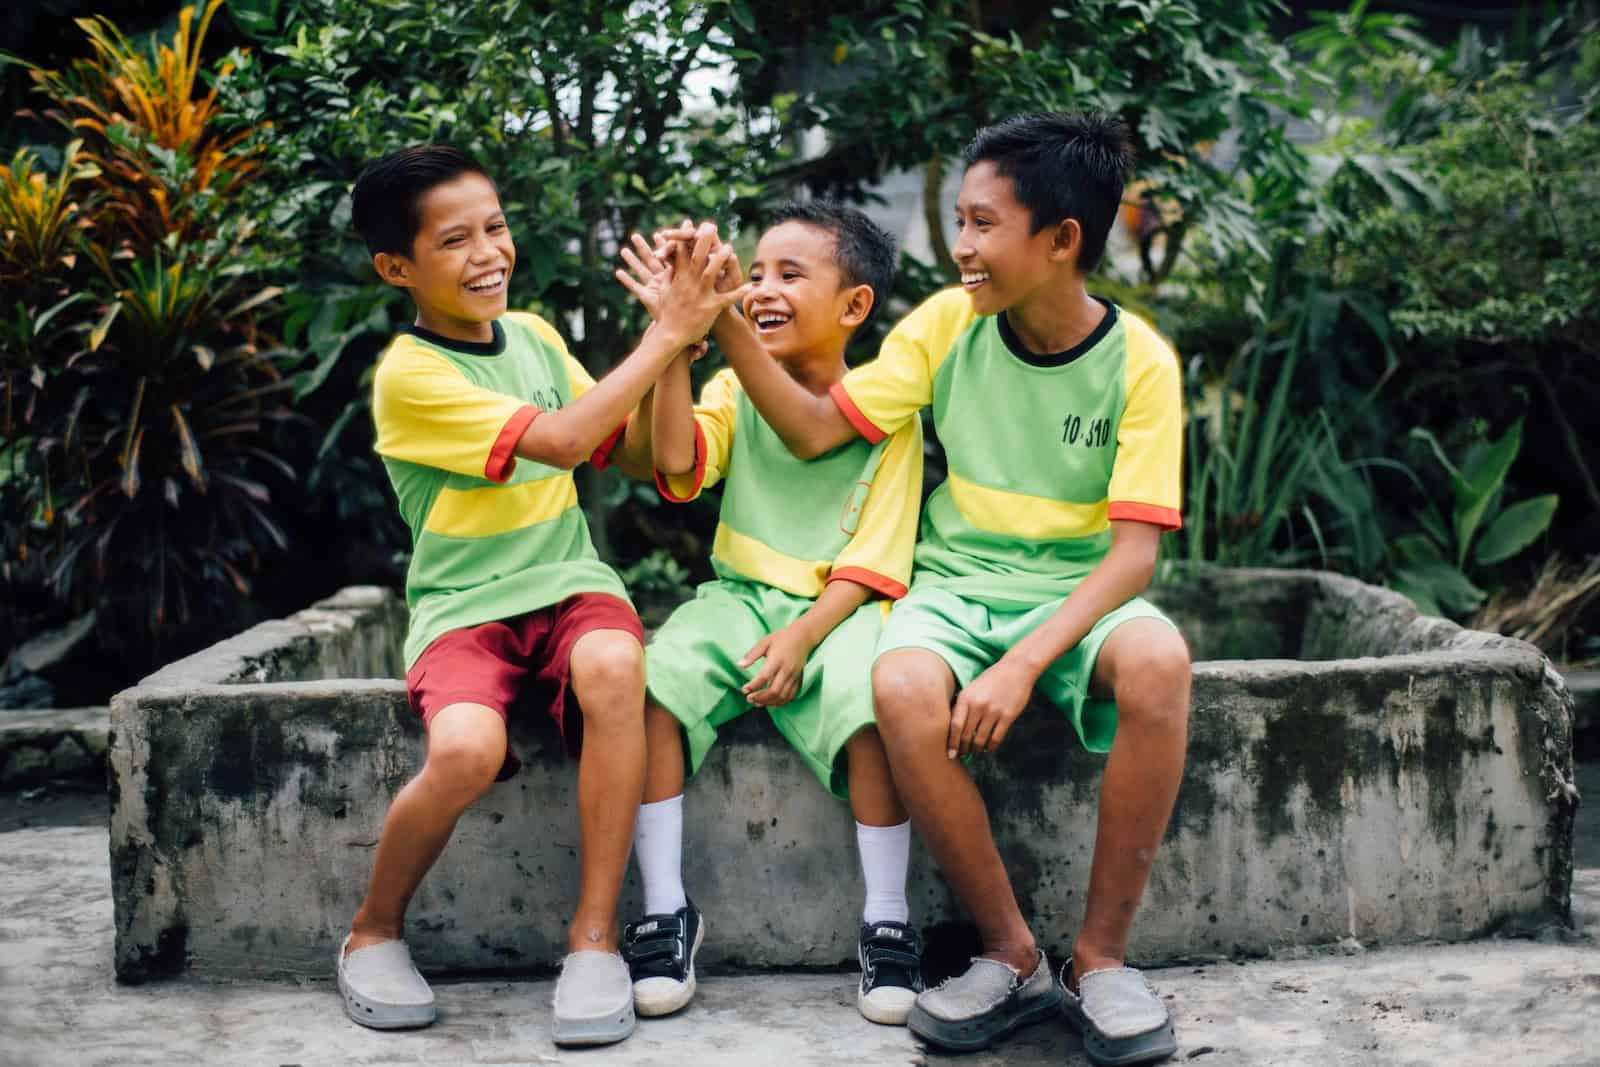 International Day of Friendship: Three boys sit outside wearing green and yellow sports uniforms, giving each other high fives. 